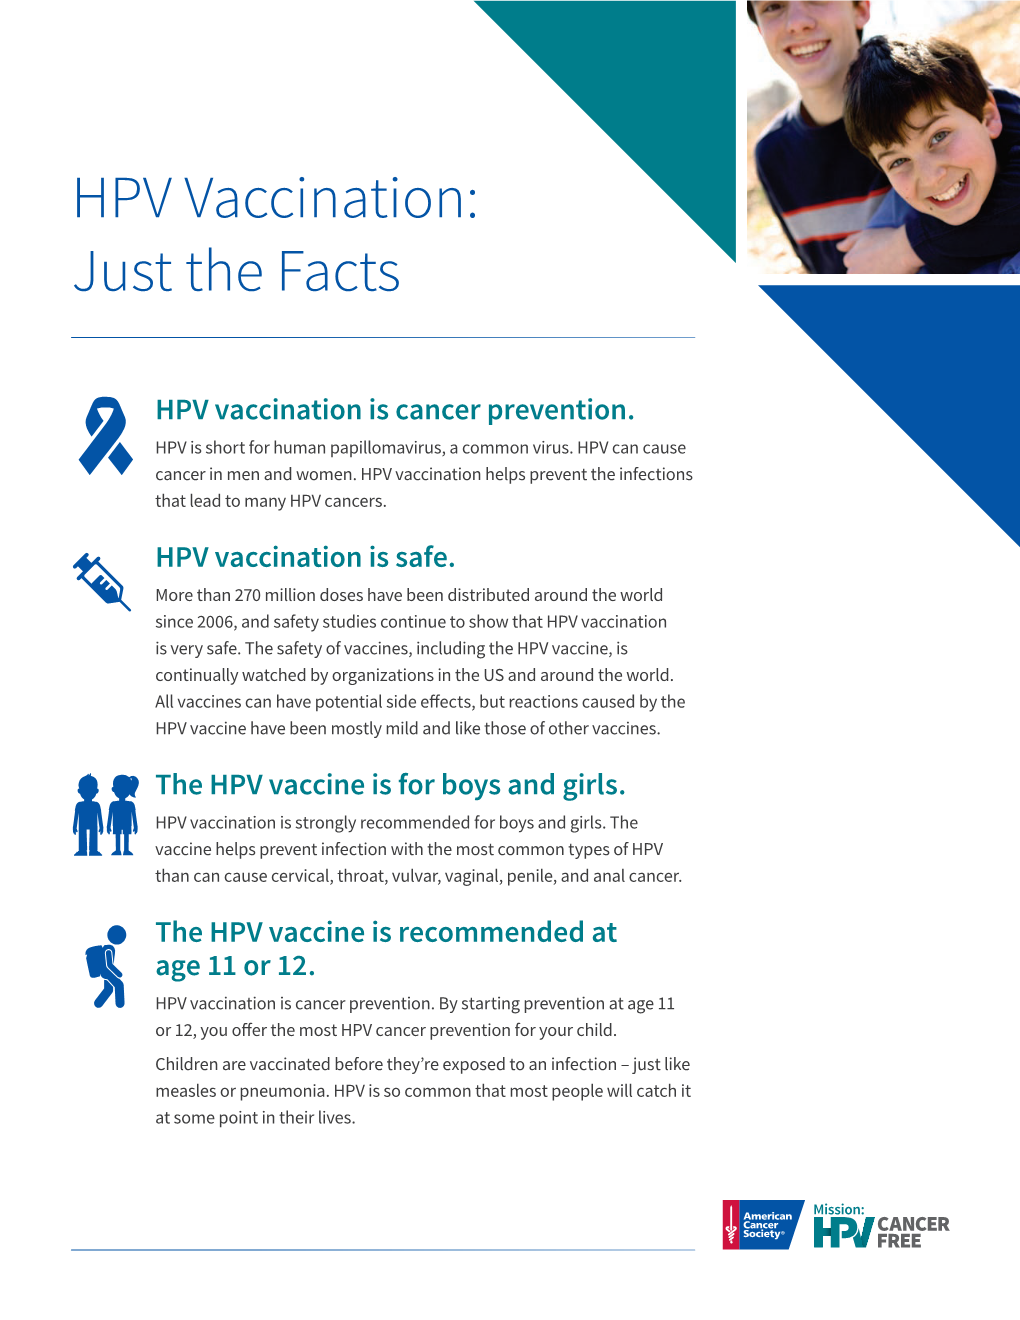 HPV Vaccination: Just the Facts